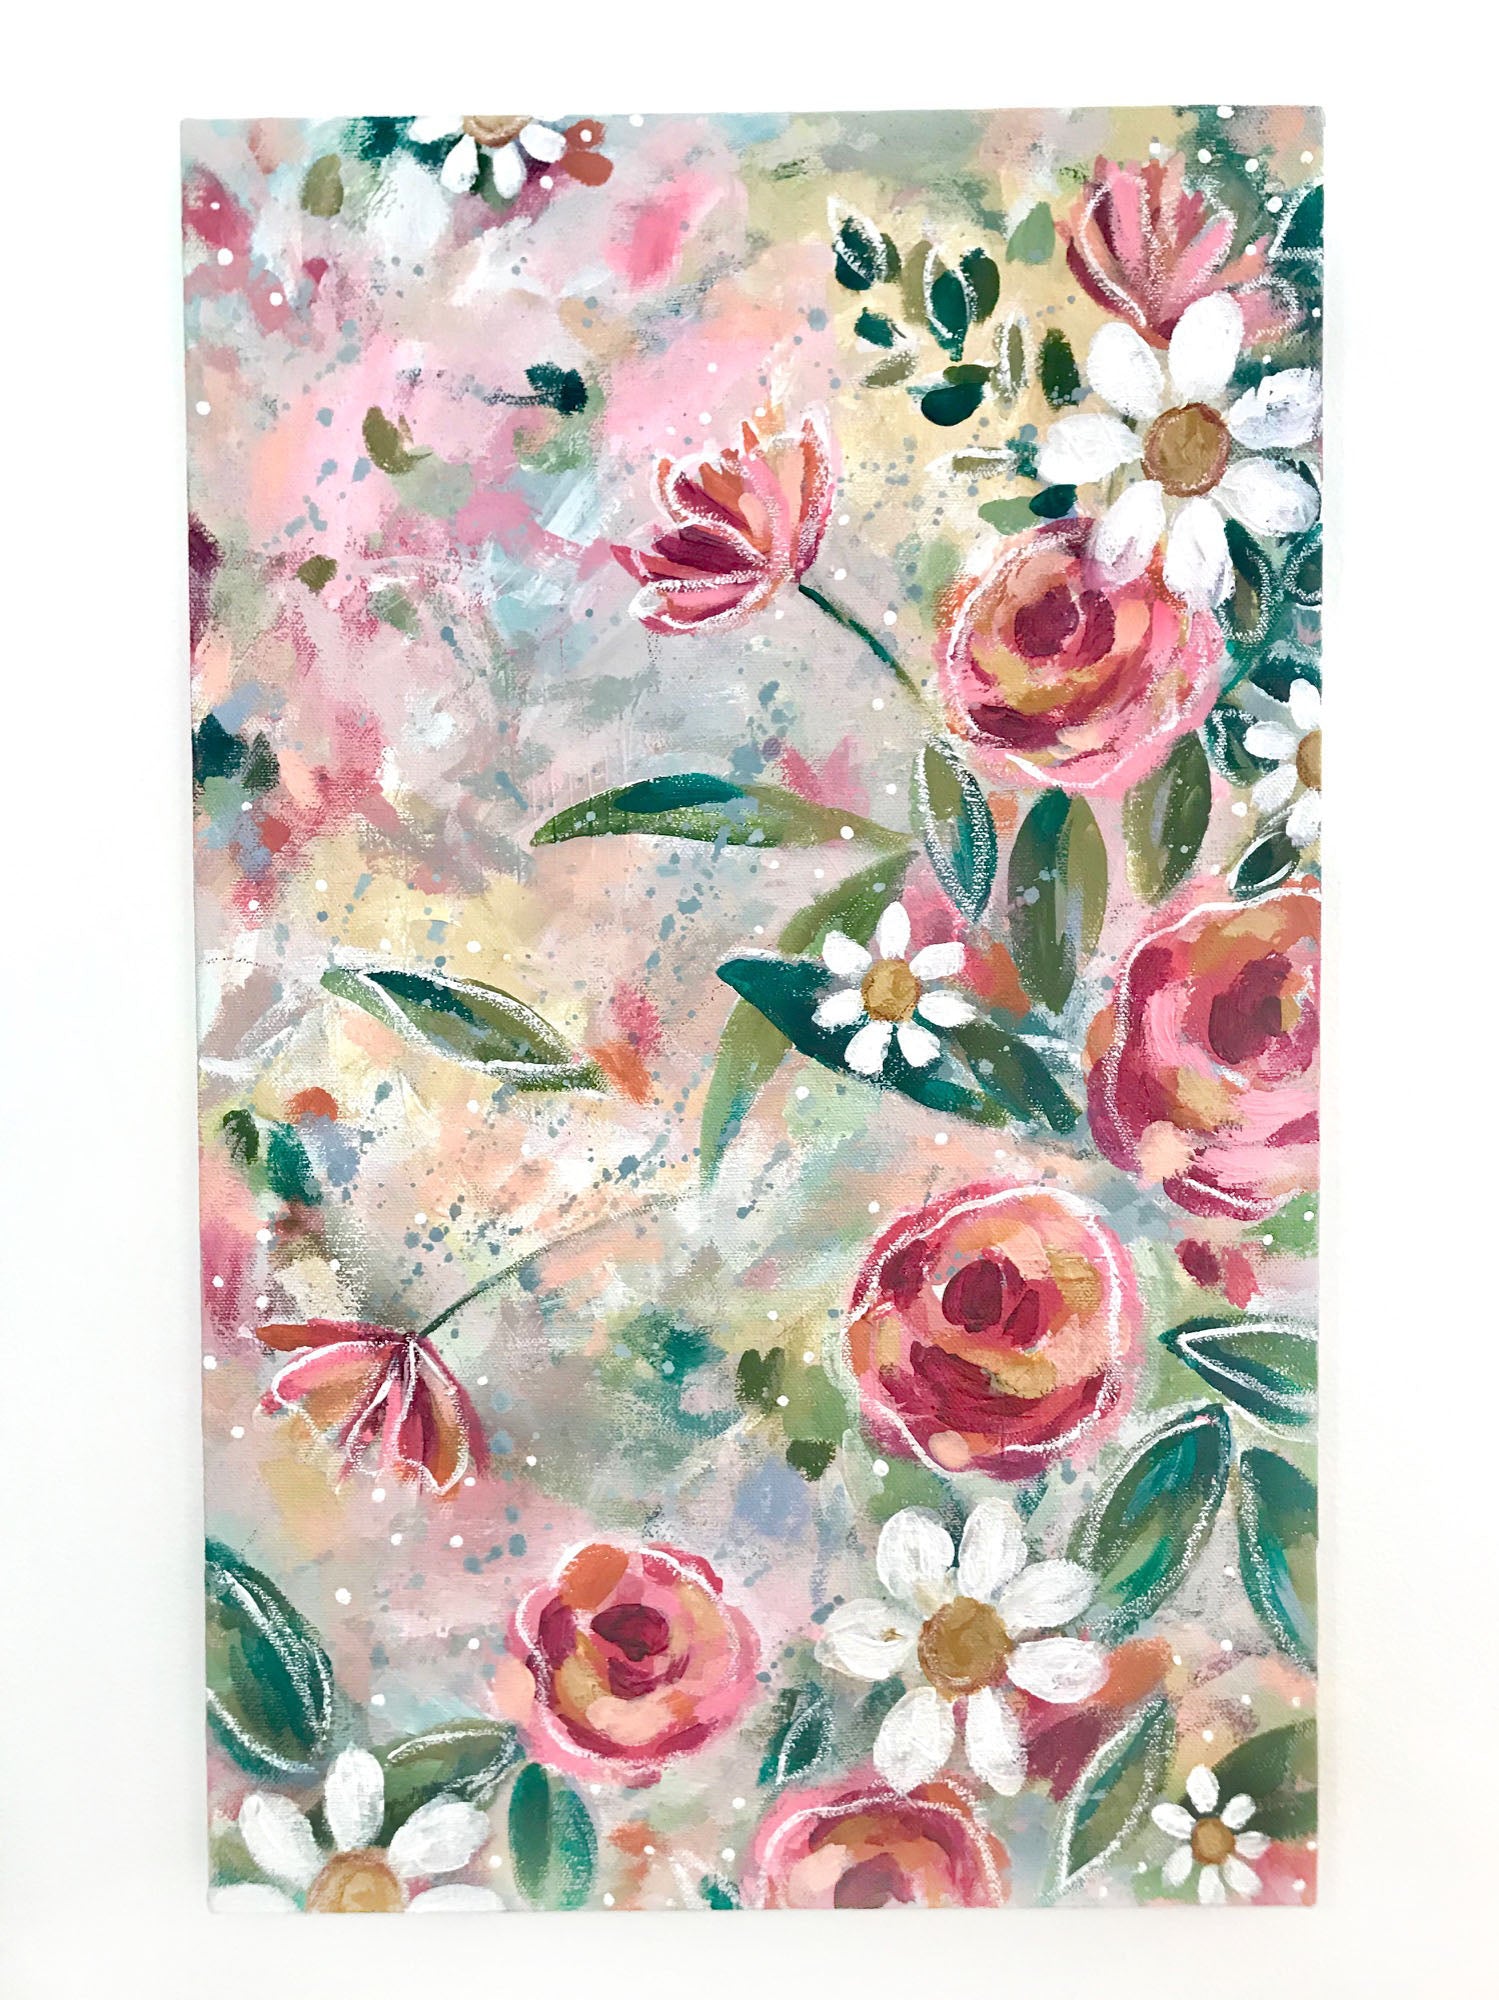 New Spring Floral Mixed Media Painting on 12.5x20 inch canvas no.1 - Bethany Joy Art